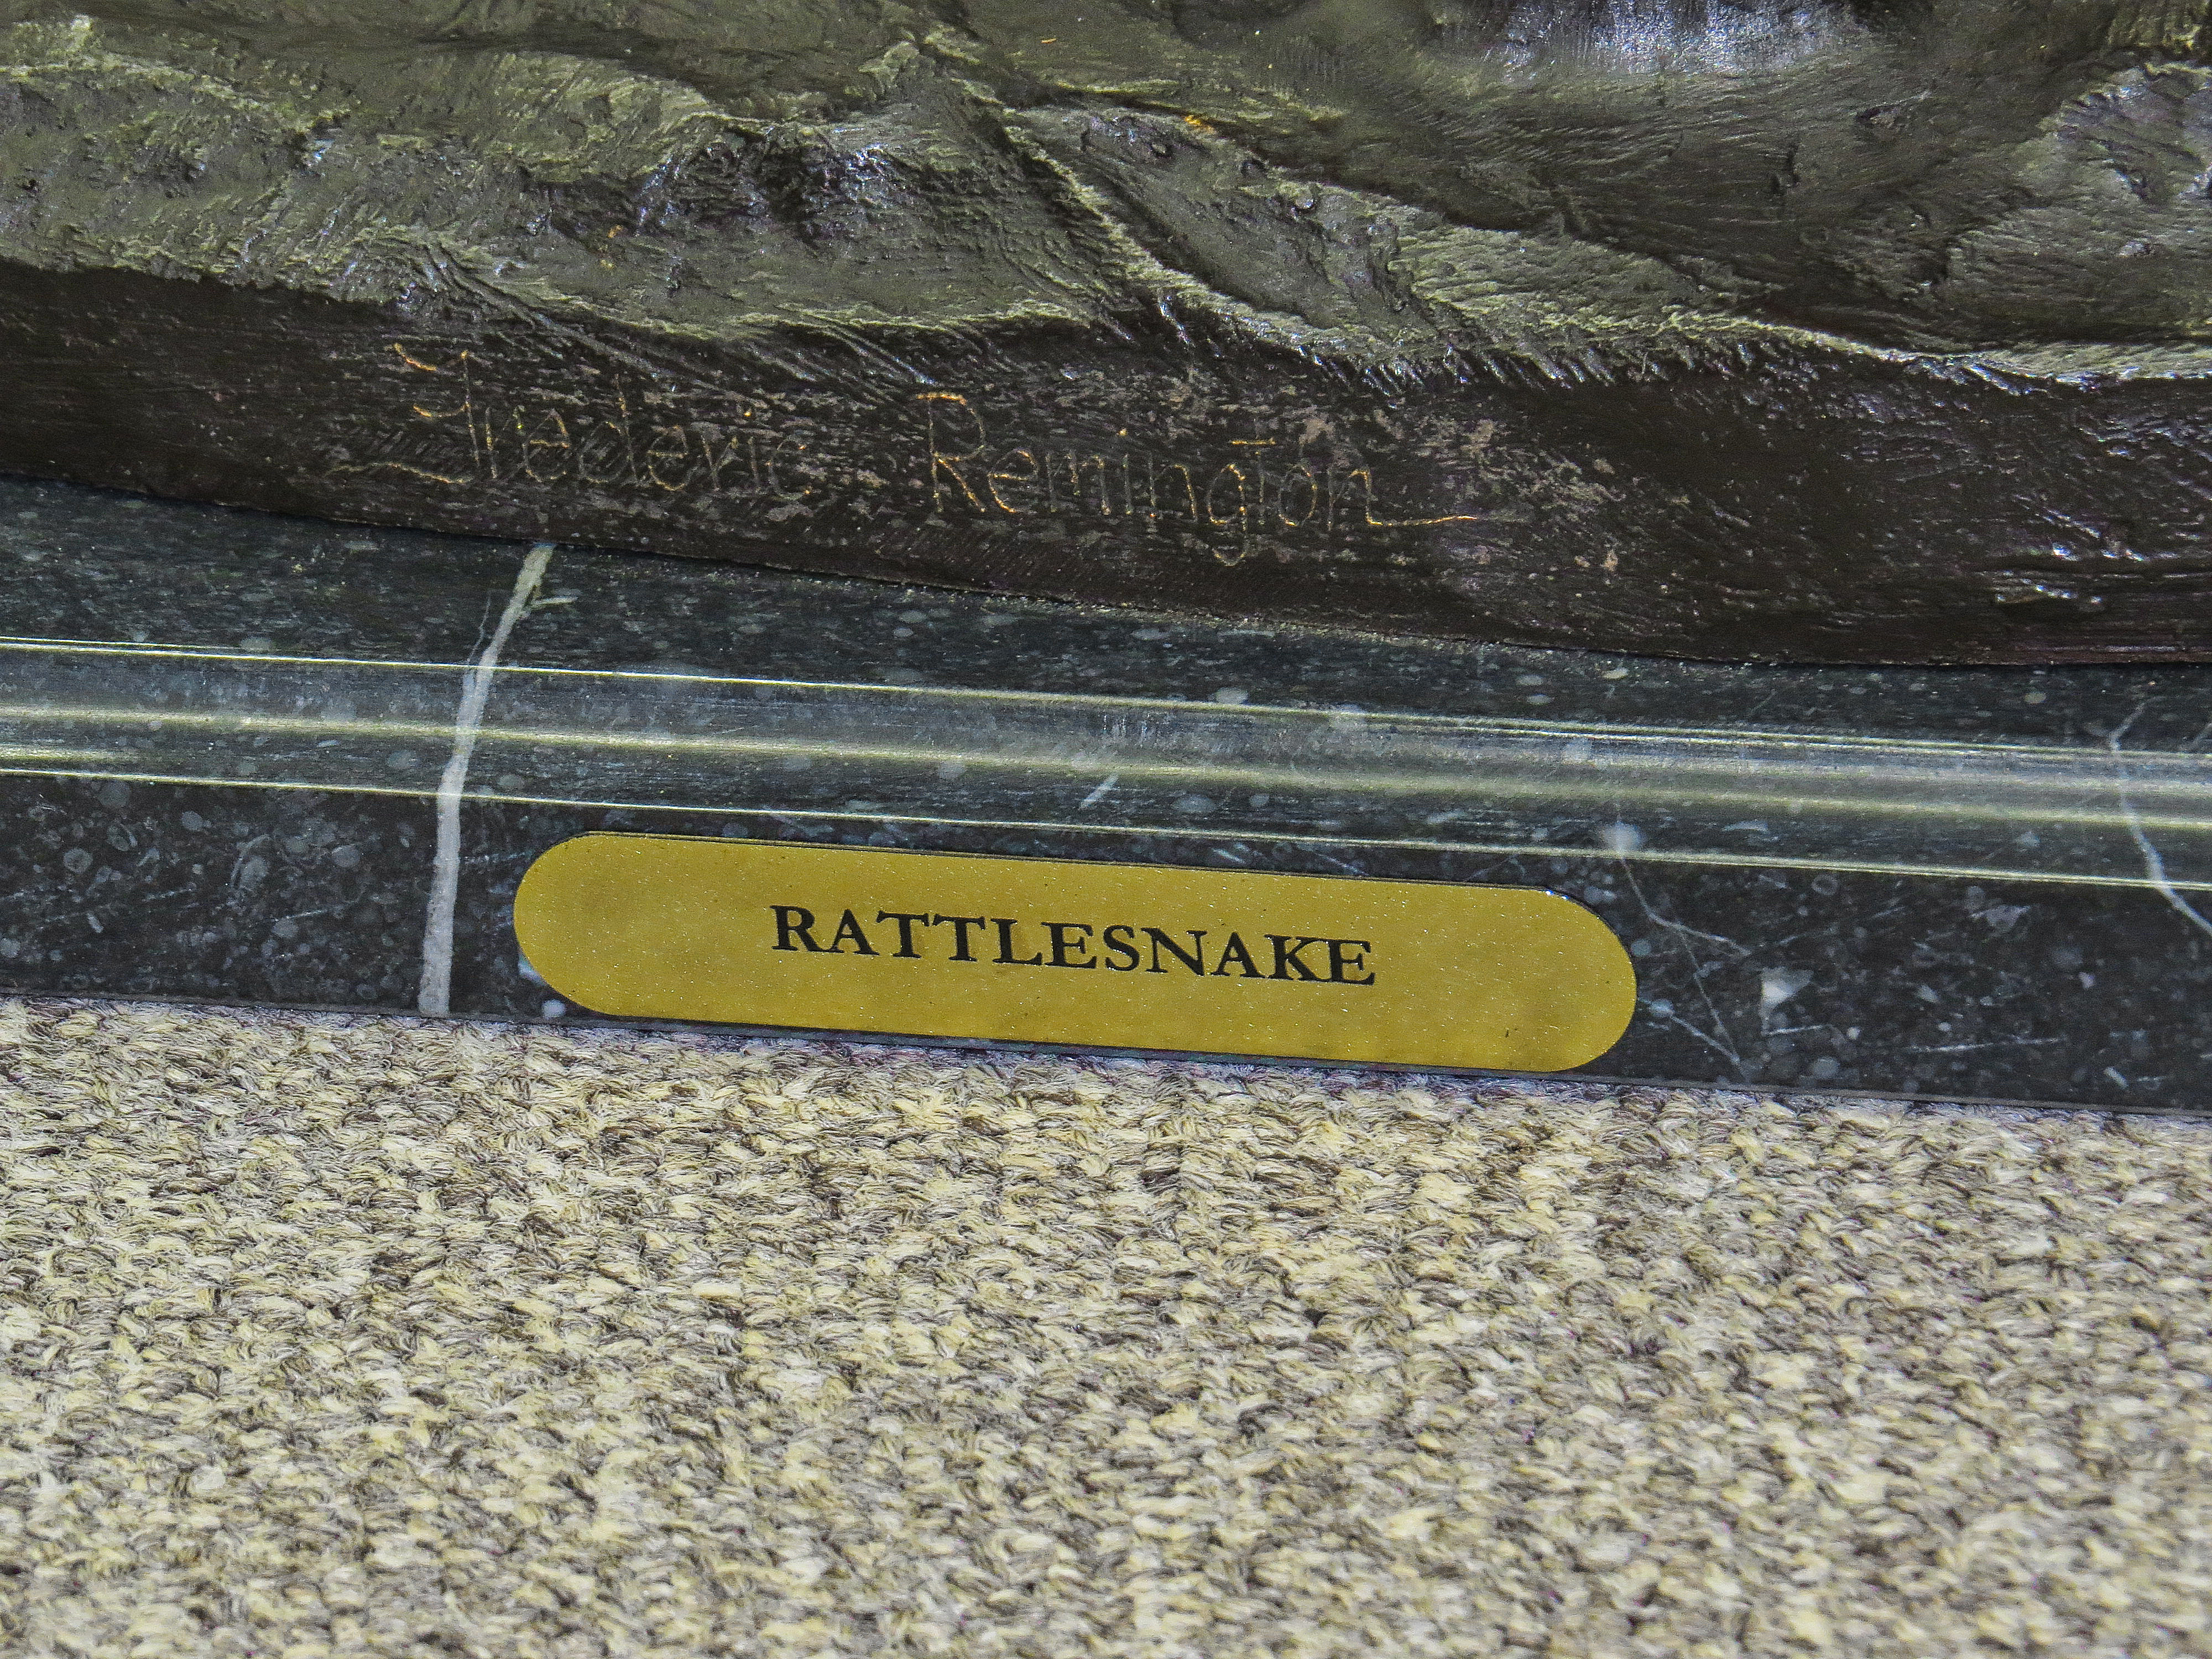 “Rattlesnake” by Frederic Remington  (SOLD)